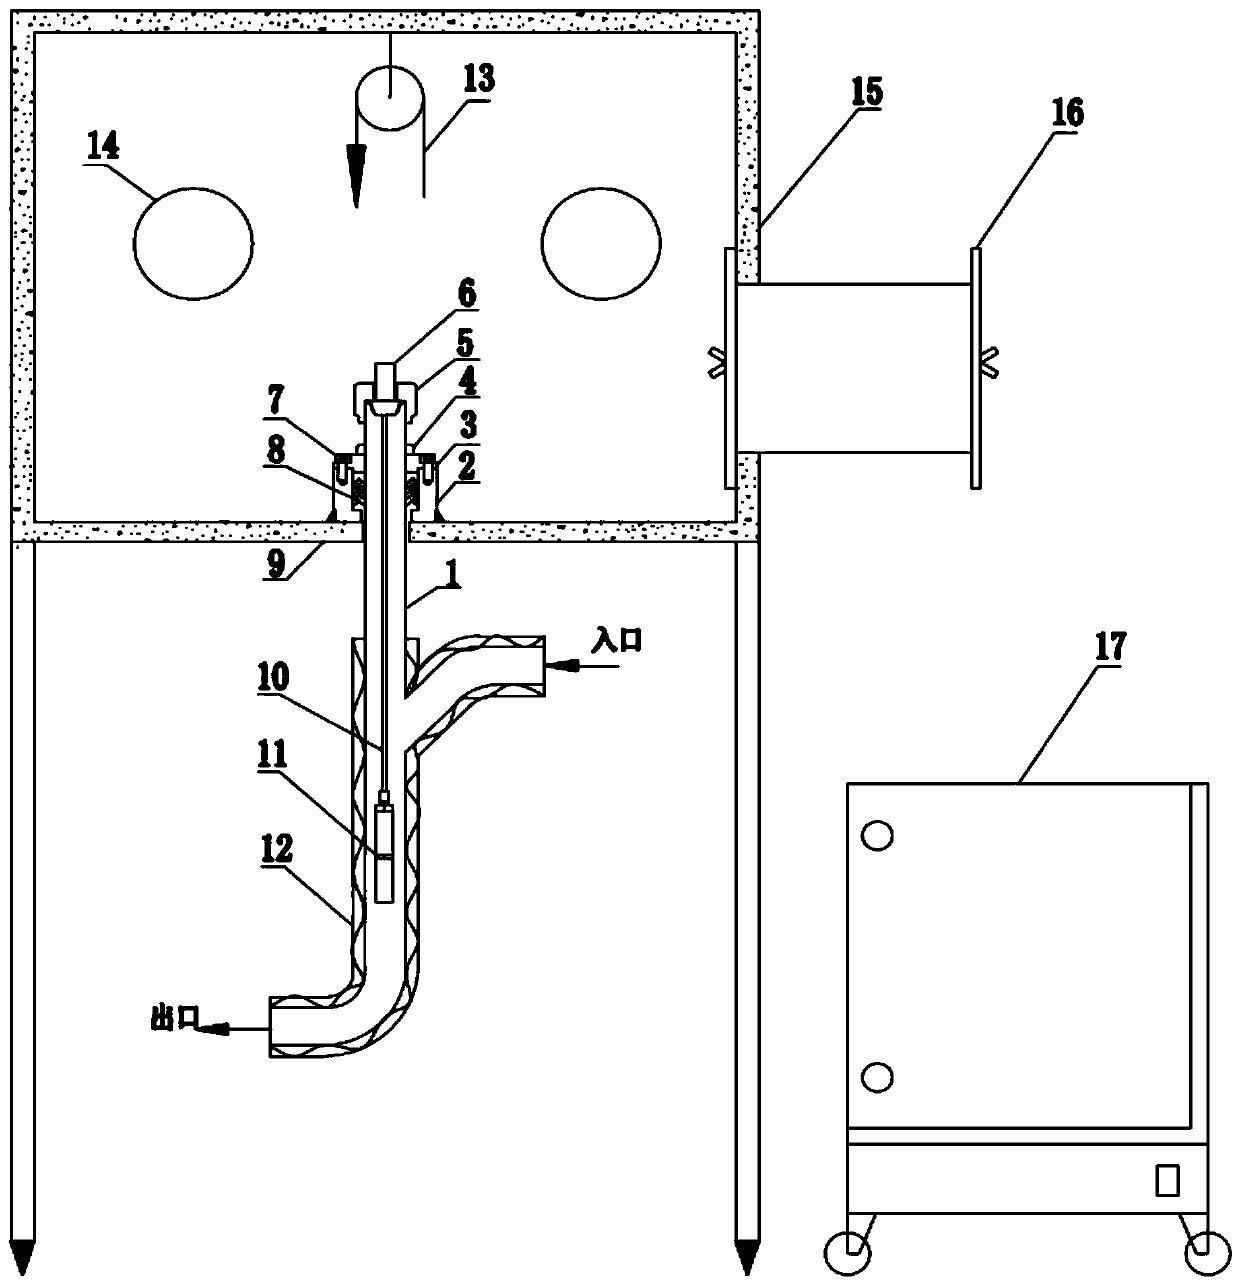 A corrosion test device and method for liquid lead or liquid lead-bismuth alloy